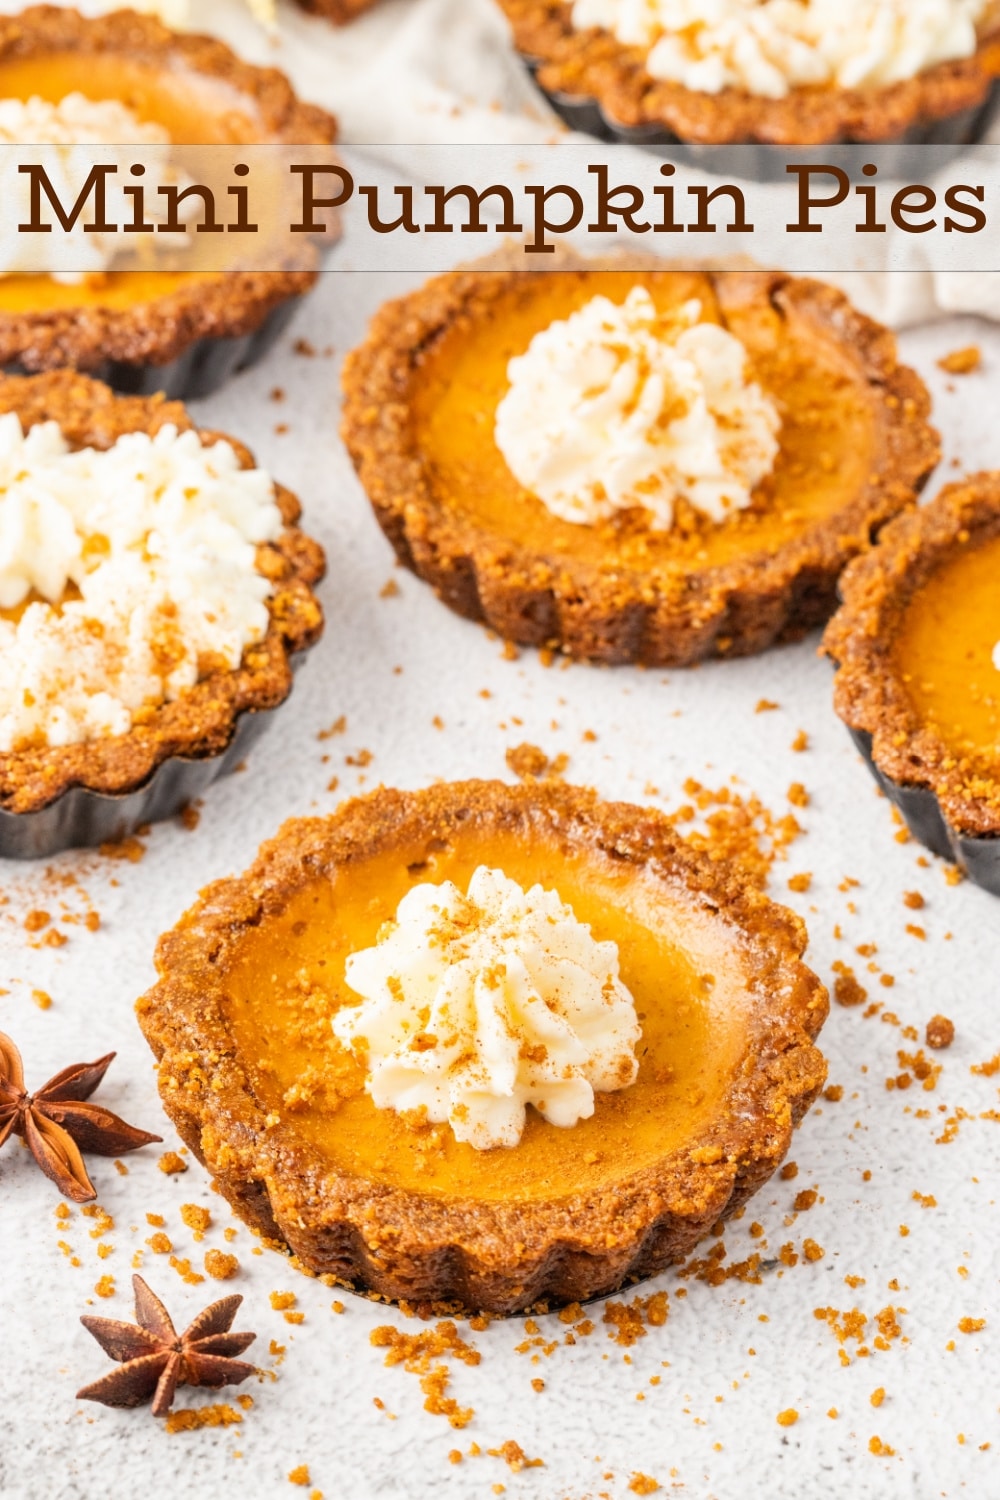 These Mini Pumpkin Pies feature a velvety pumpkin filling in a gingersnap crust, crowned with clouds of decadent whipped cream. The gingersnap crust isn't just a crunchy foundation, but a unique-tasting gateway to the familiar flavors of homemade pumpkin pie. These mini desserts are going to be the most popular item on your holiday table. via @cmpollak1